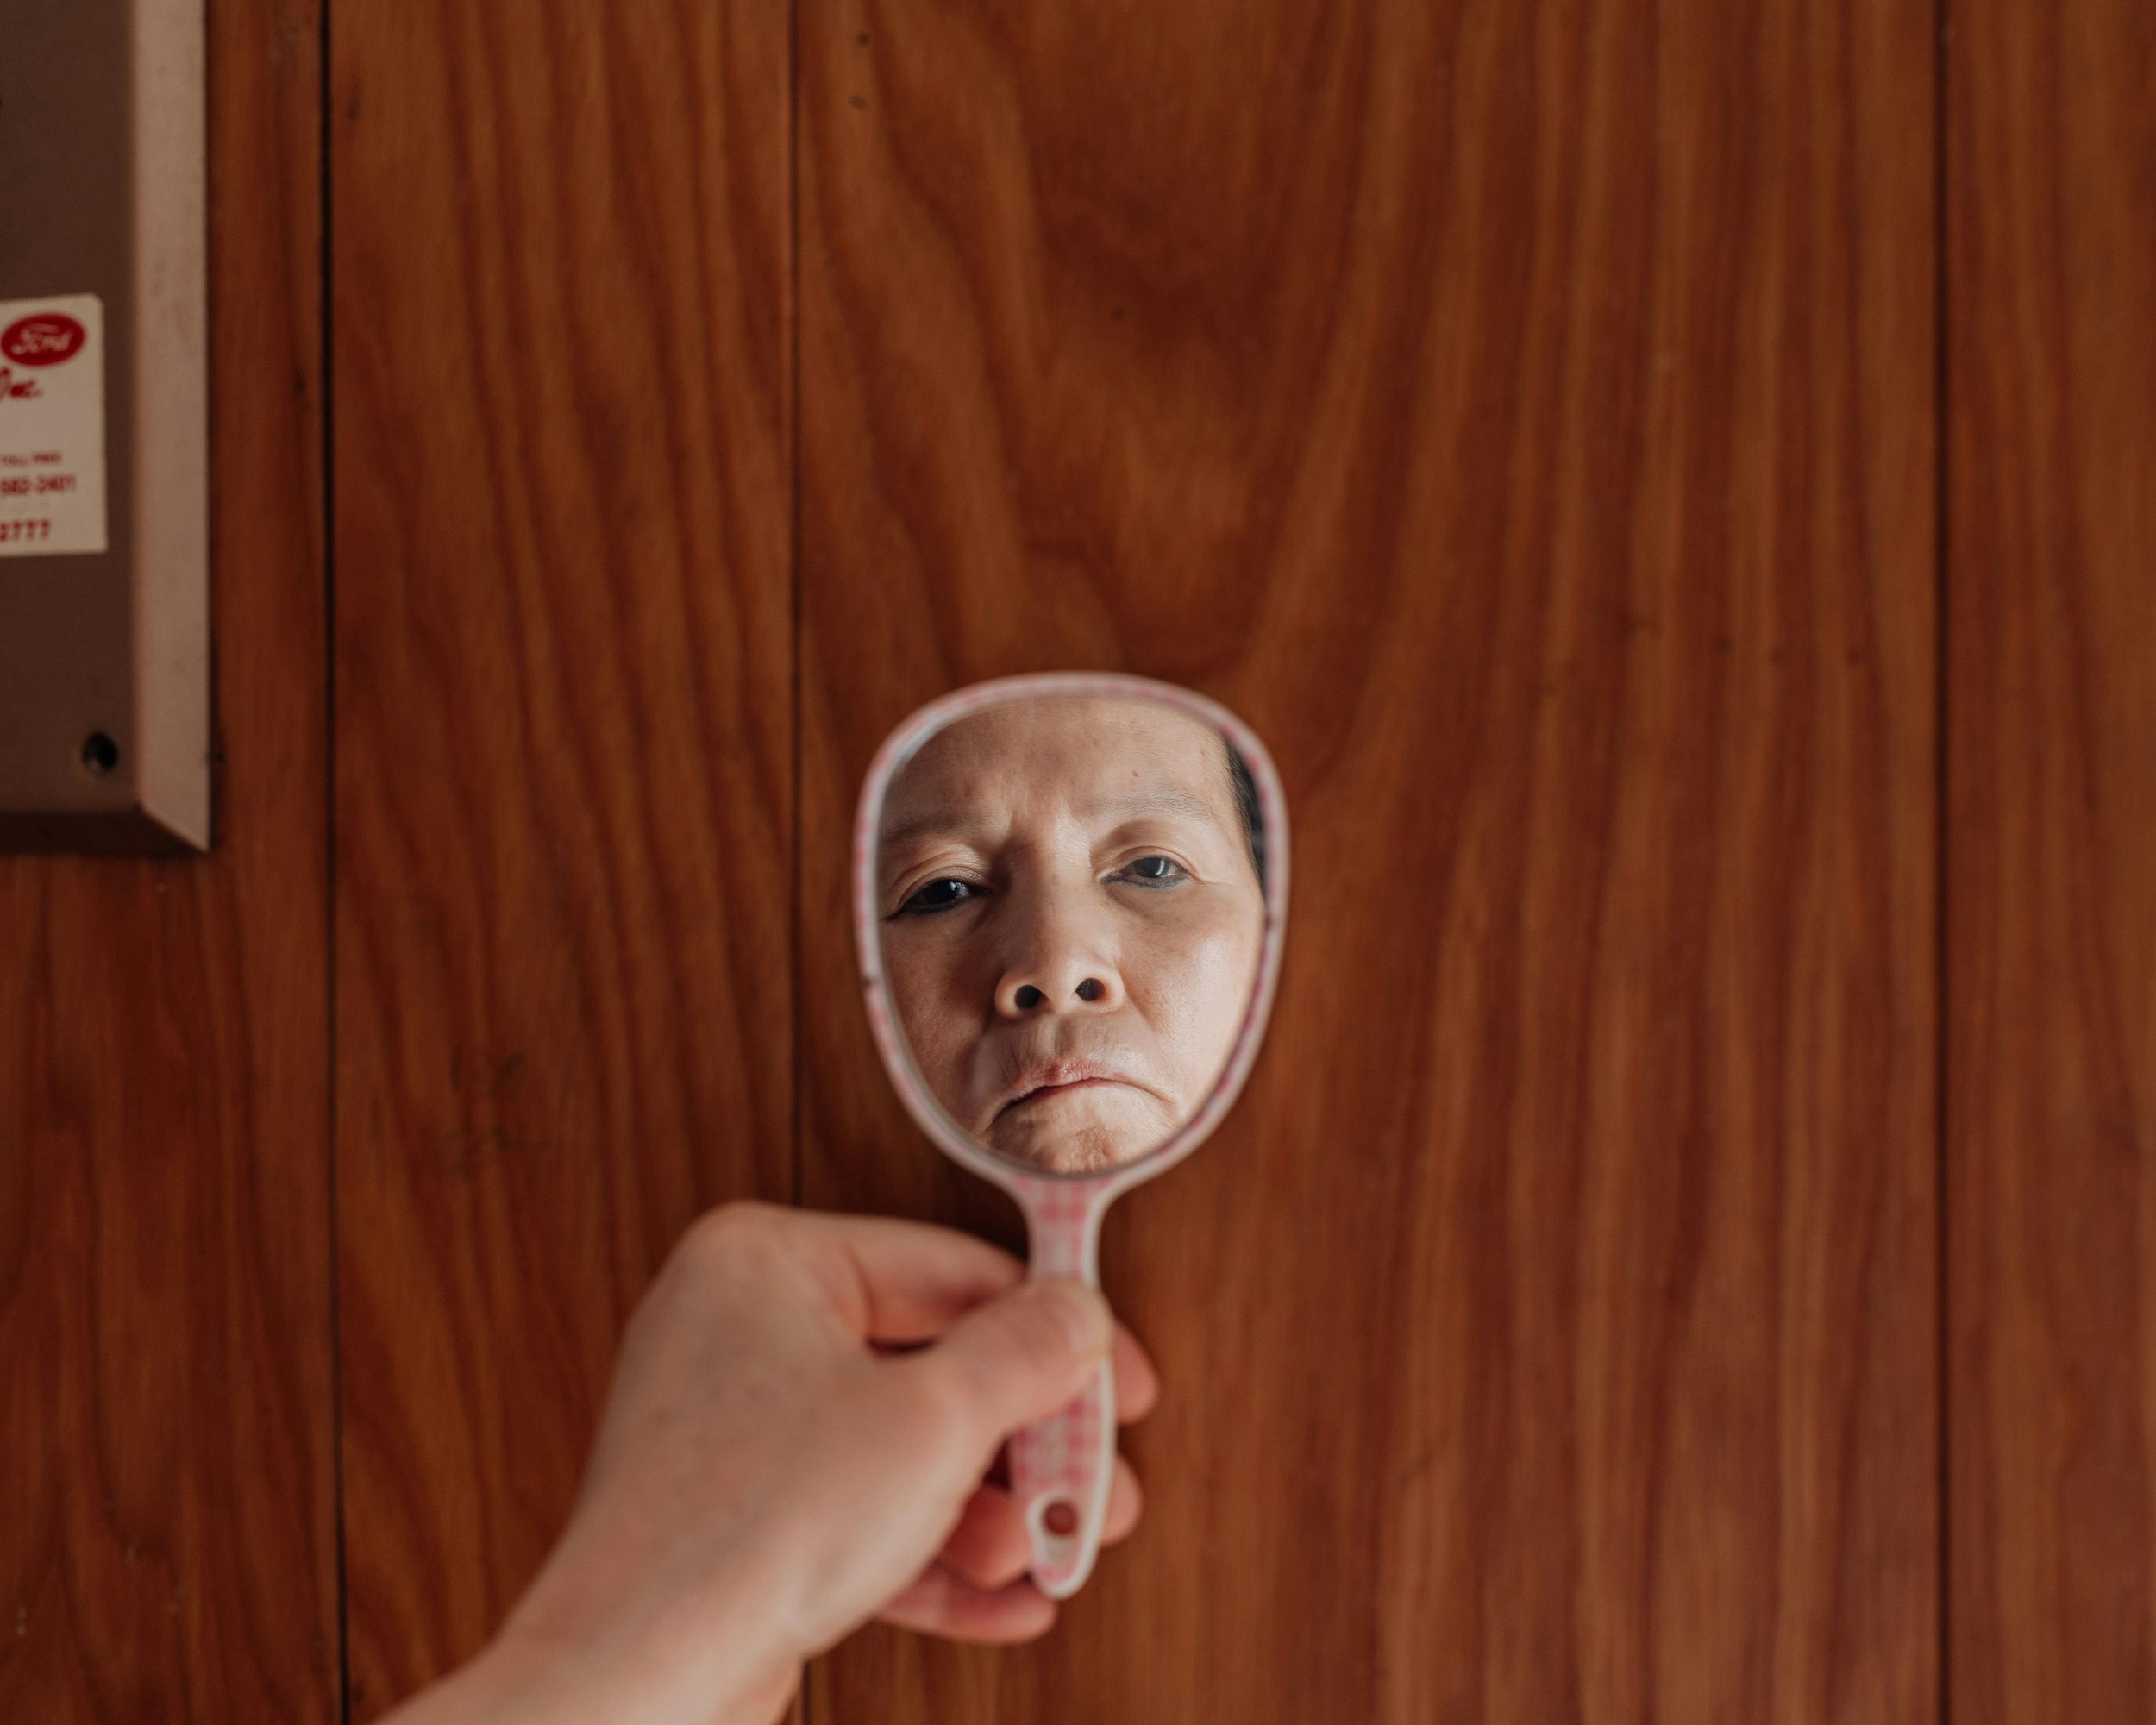 May Mirror Mother Mirror, 2019